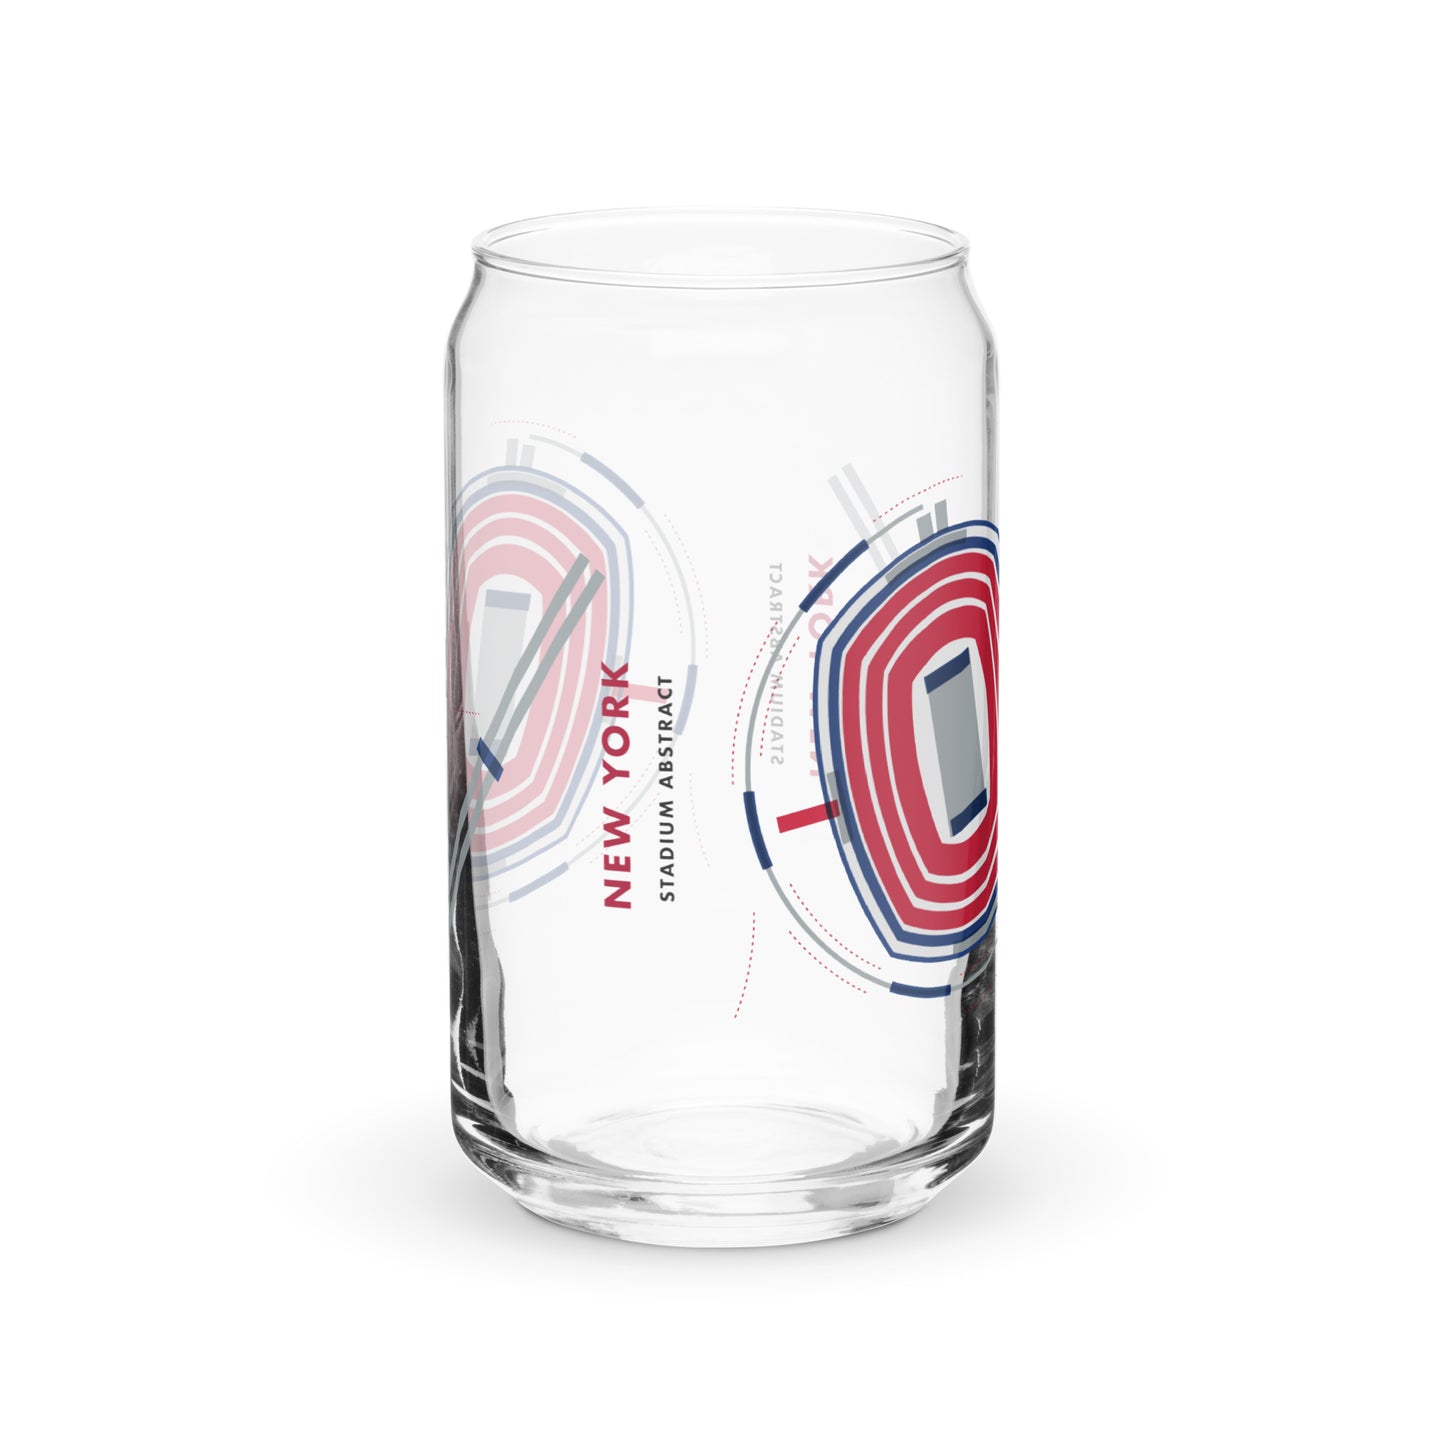 New York Giants | Can-shaped glass